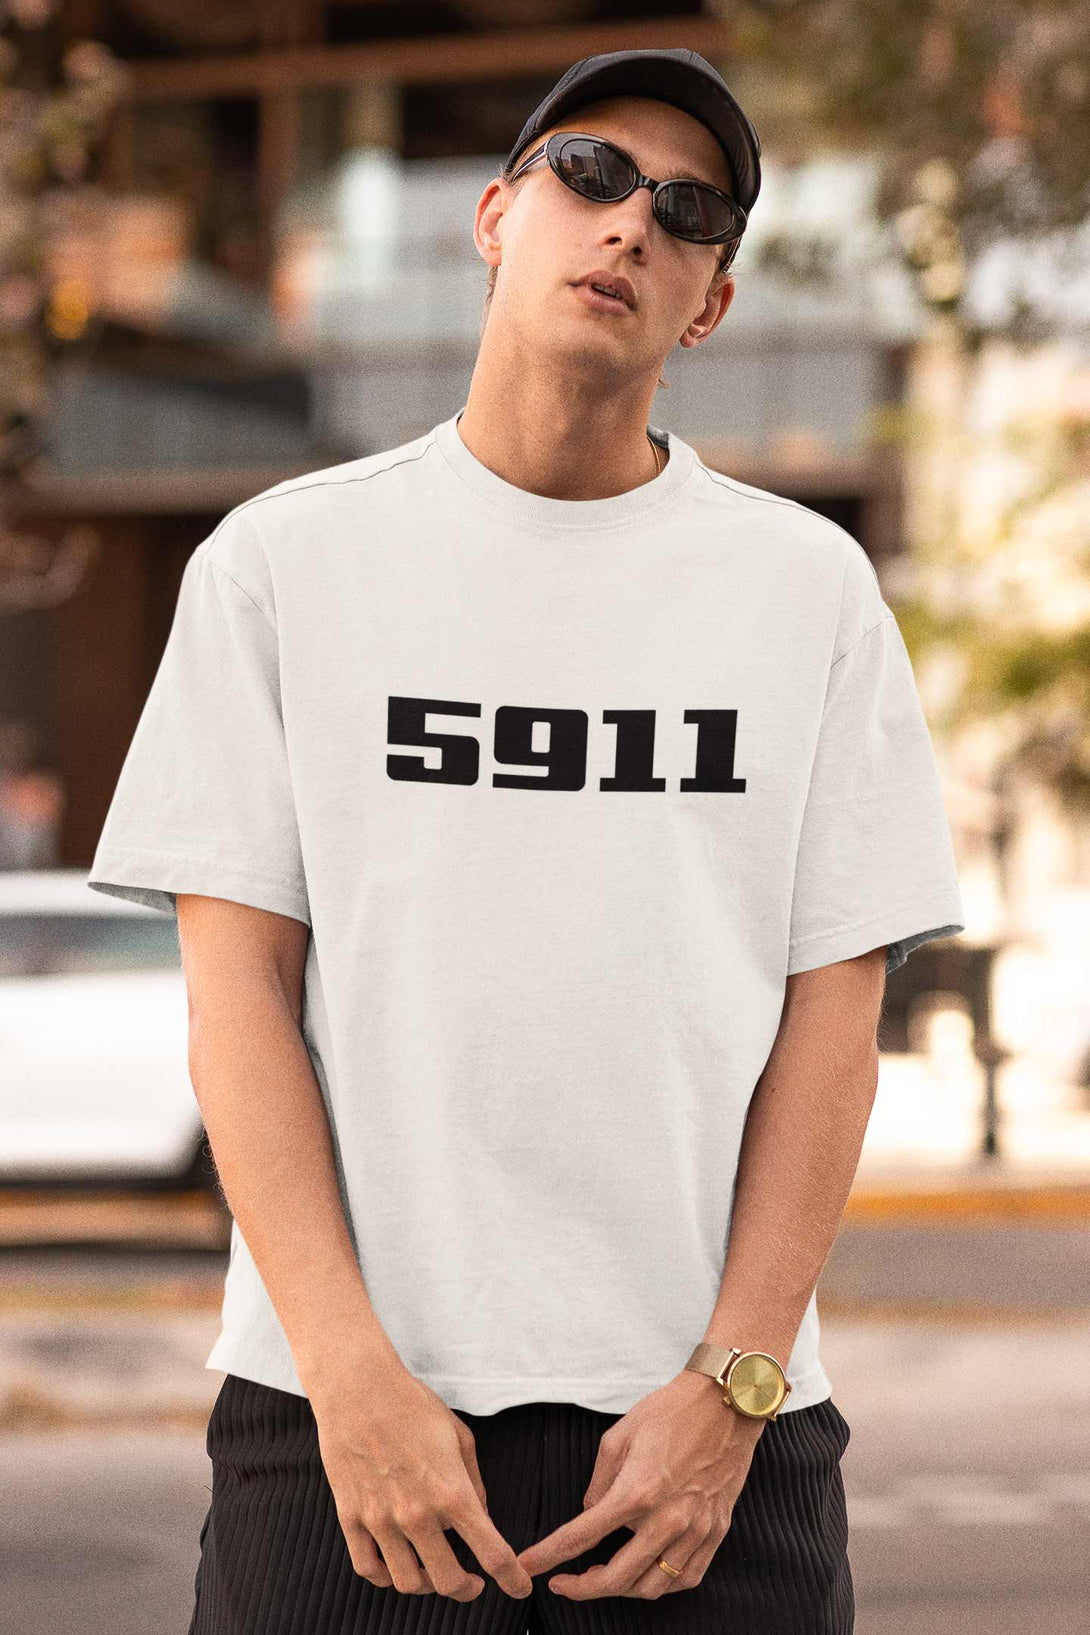 5911 printed on front of White Oversized T-shirt